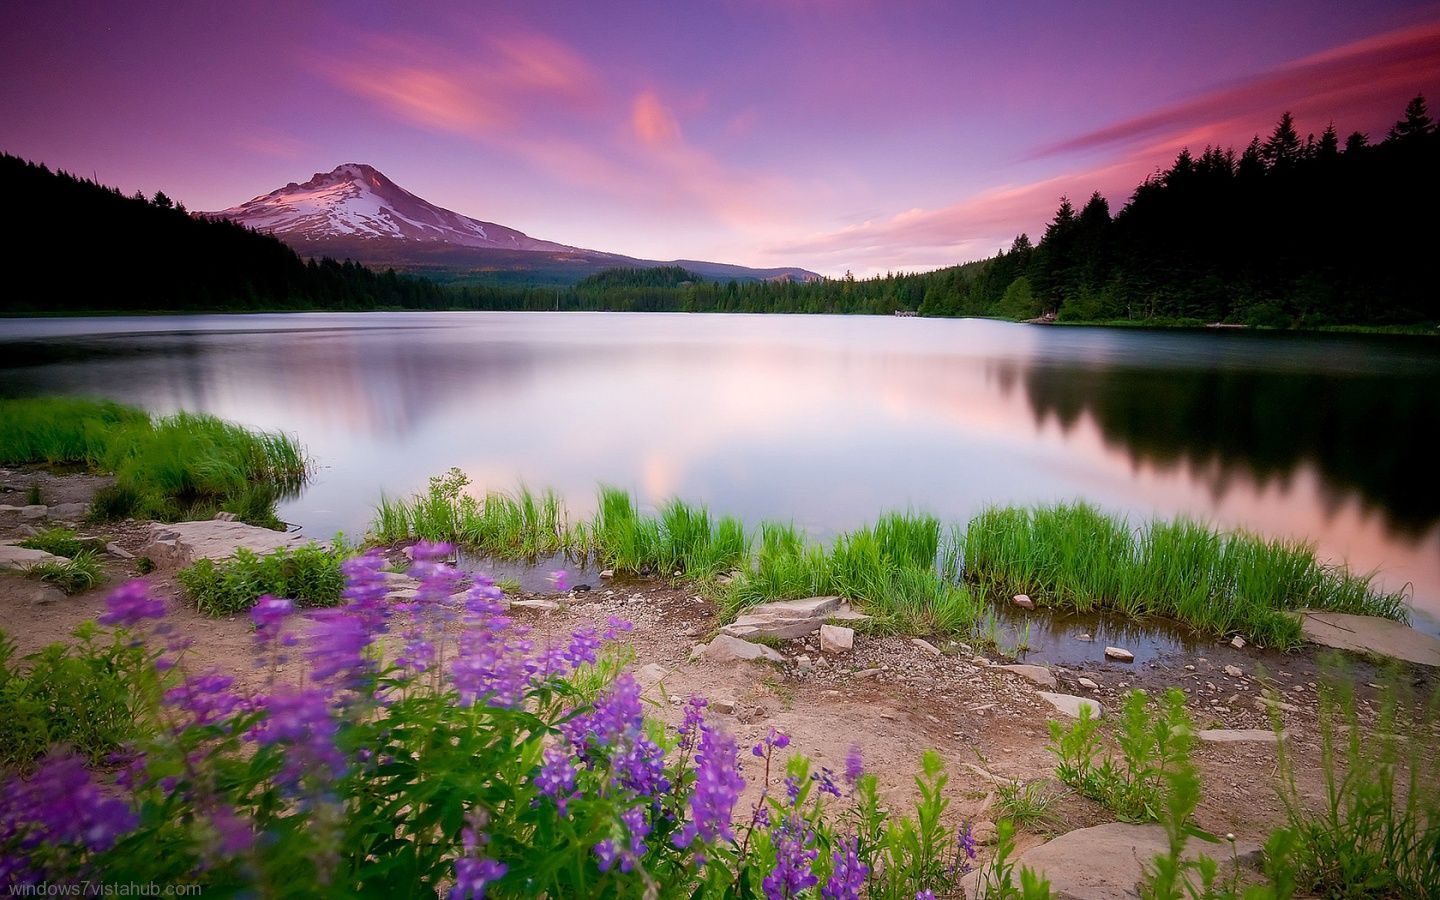 A mountain is reflected in a lake with purple flowers in the foreground. - Lake